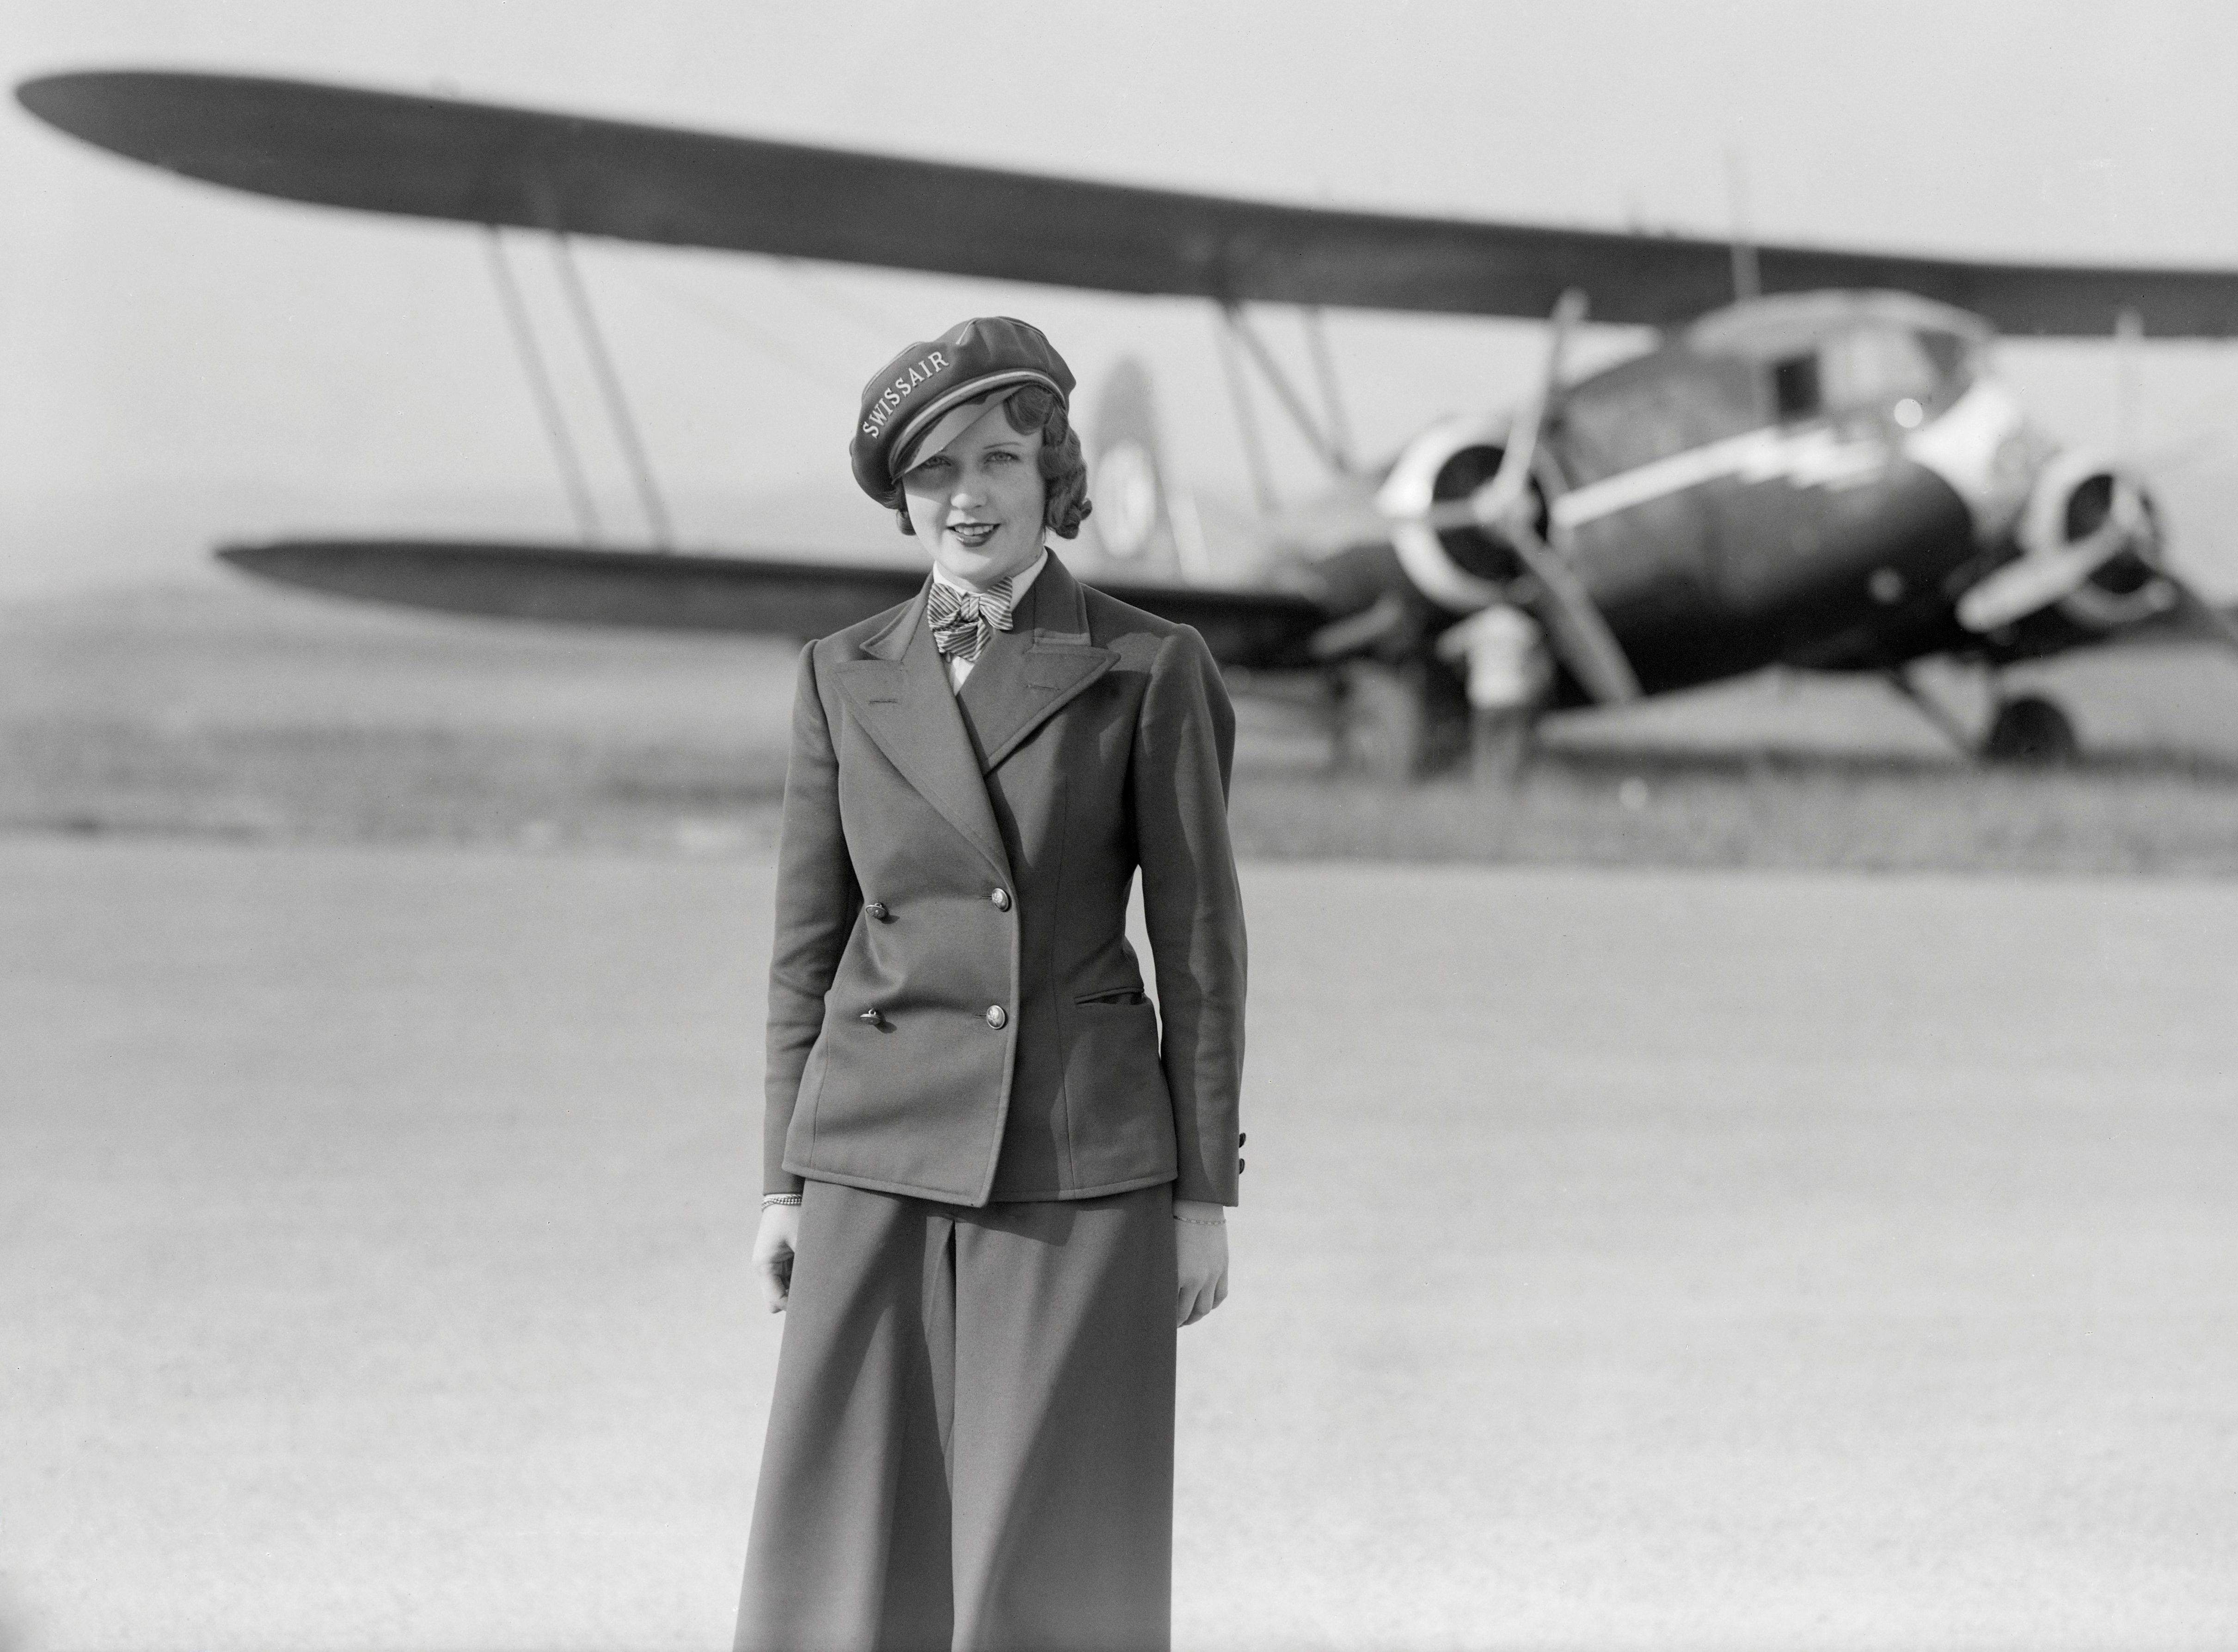 Nelly Diener in front of her Curtis Condor aircraft.